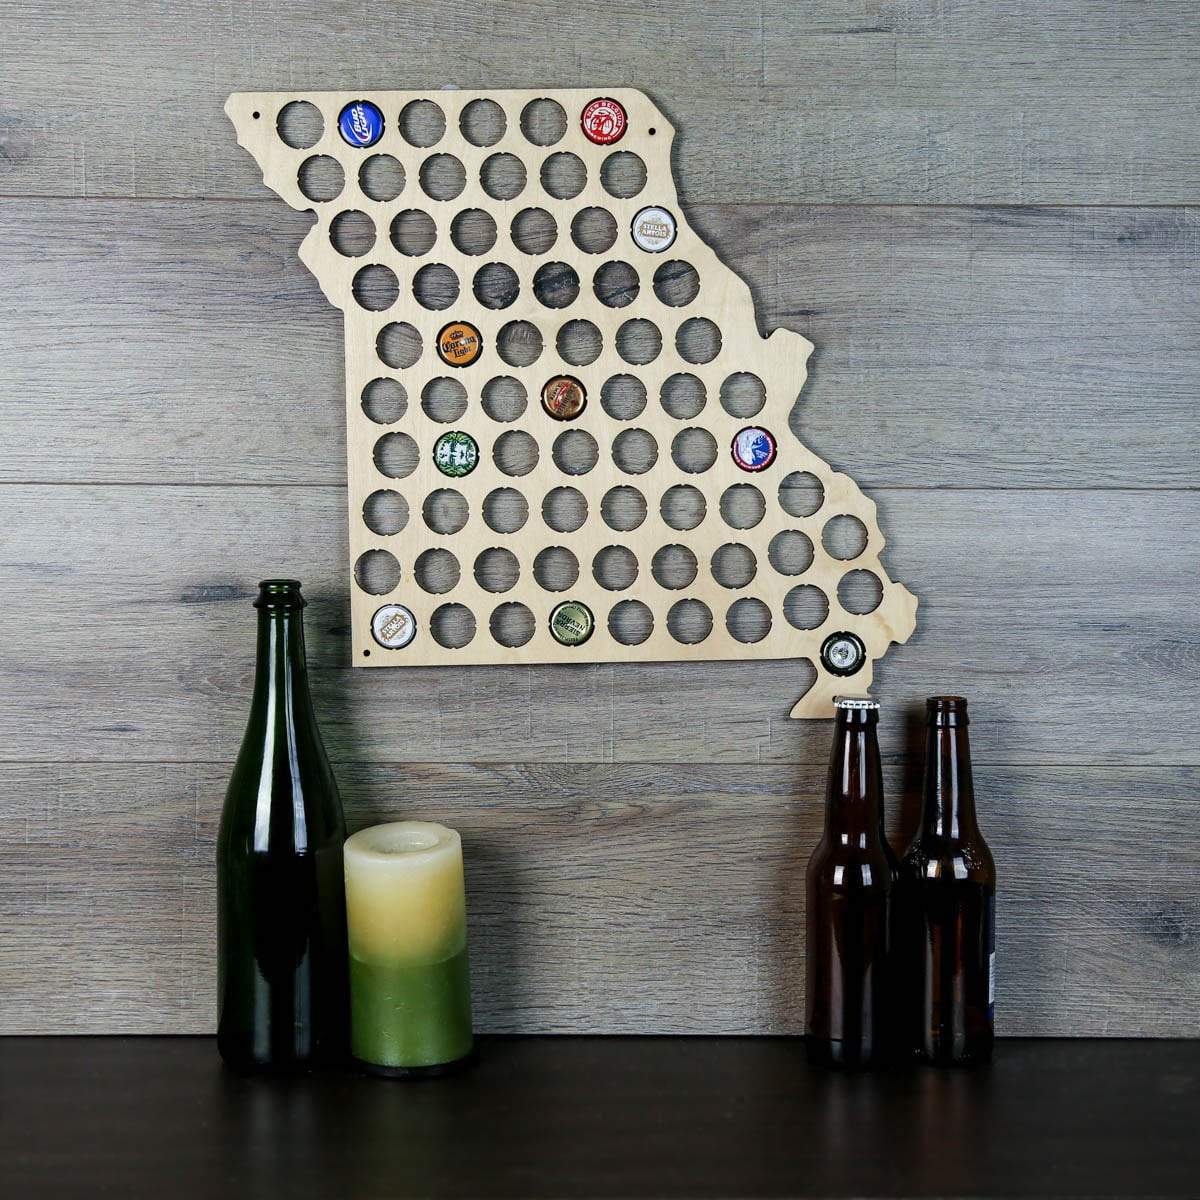 Torched Products Beer Bottle Cap Holder Missouri Beer Cap Map (777570123893)